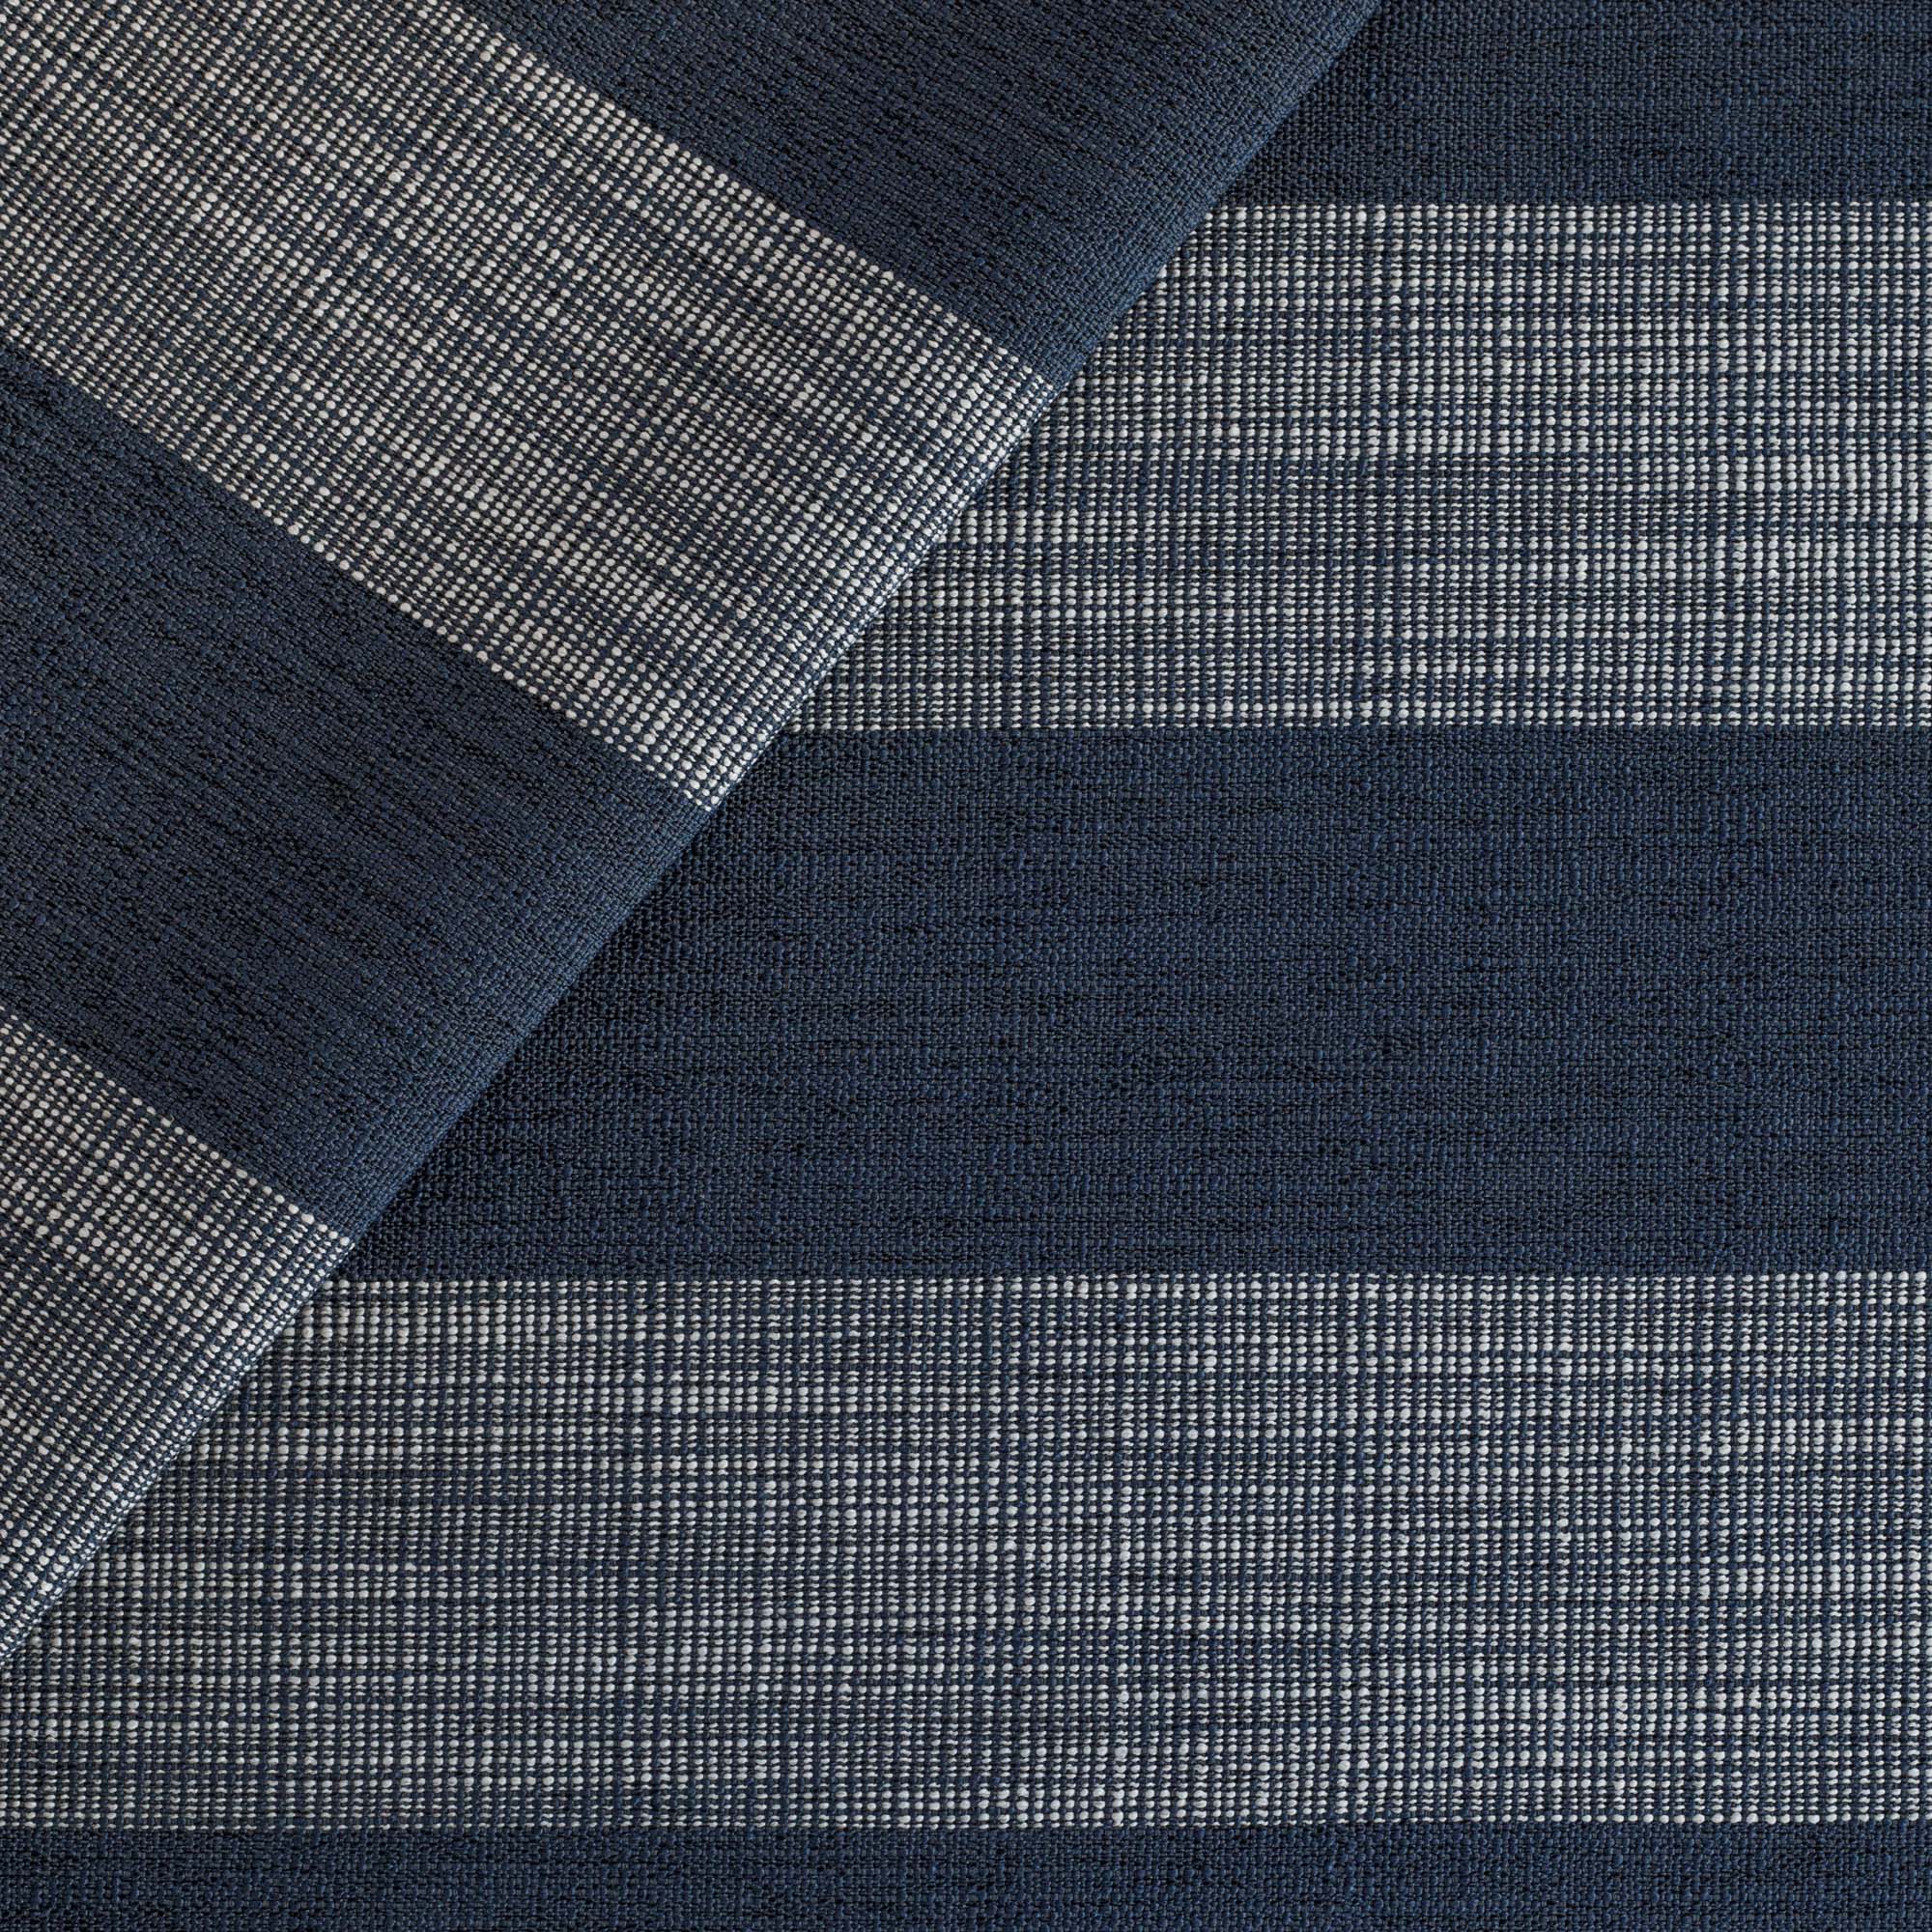 a deep navy blue and white wide striped upholstery fabric